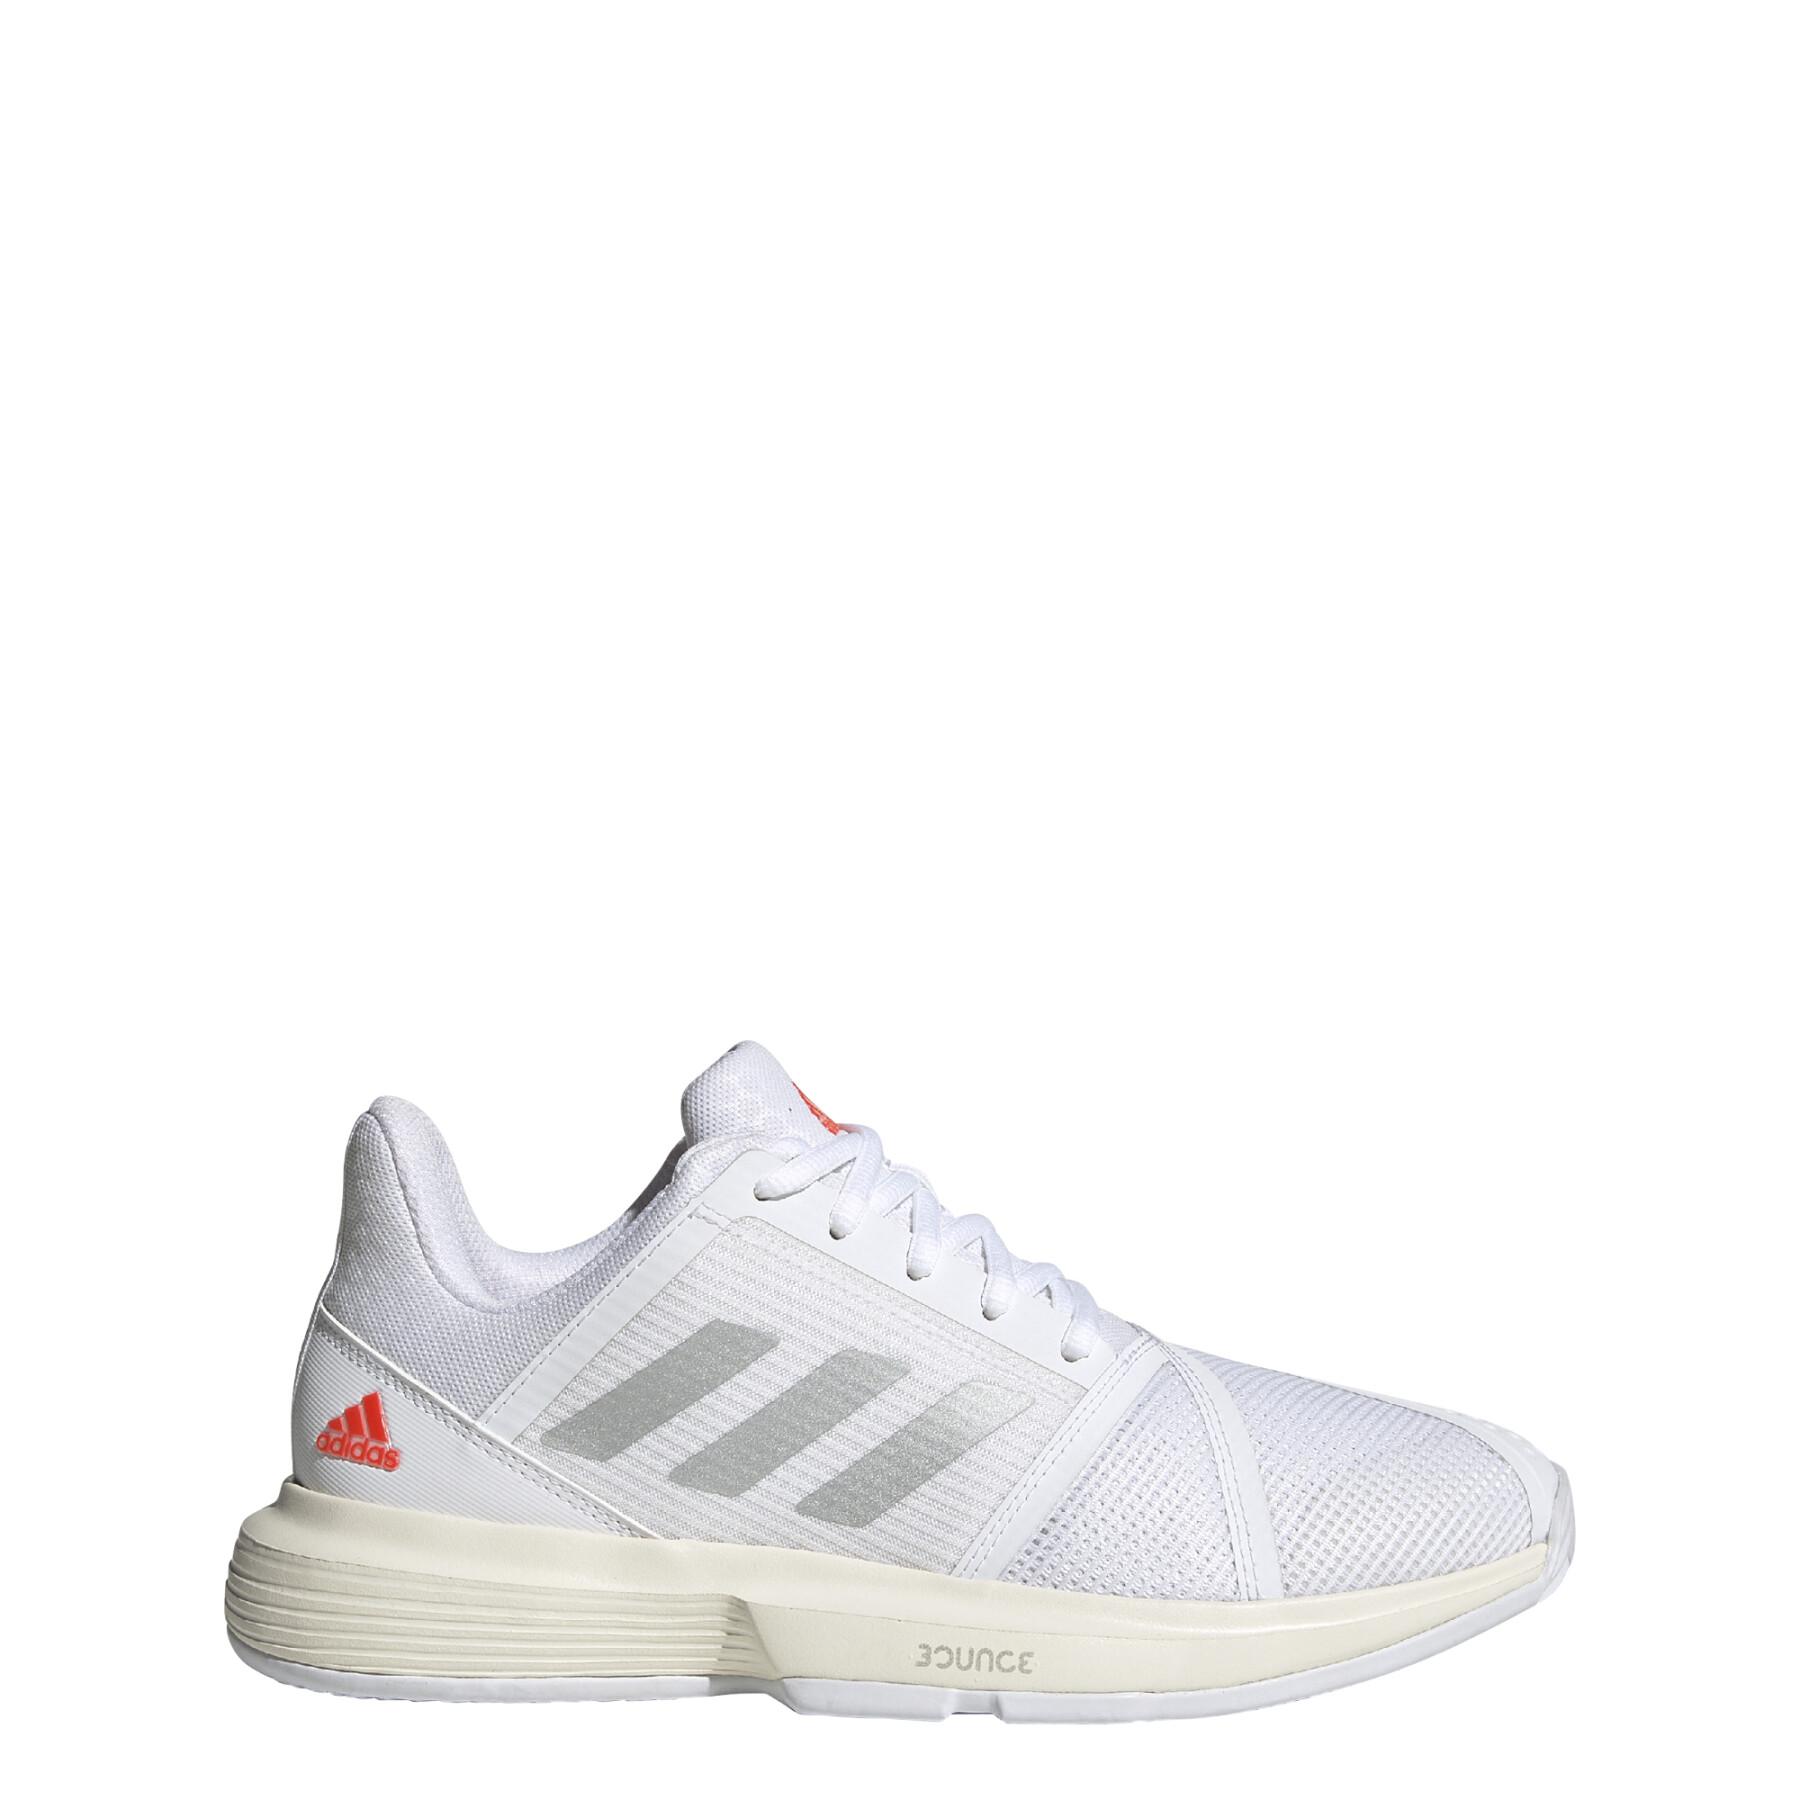 Chaussures femme adidas CourtJam Bounce